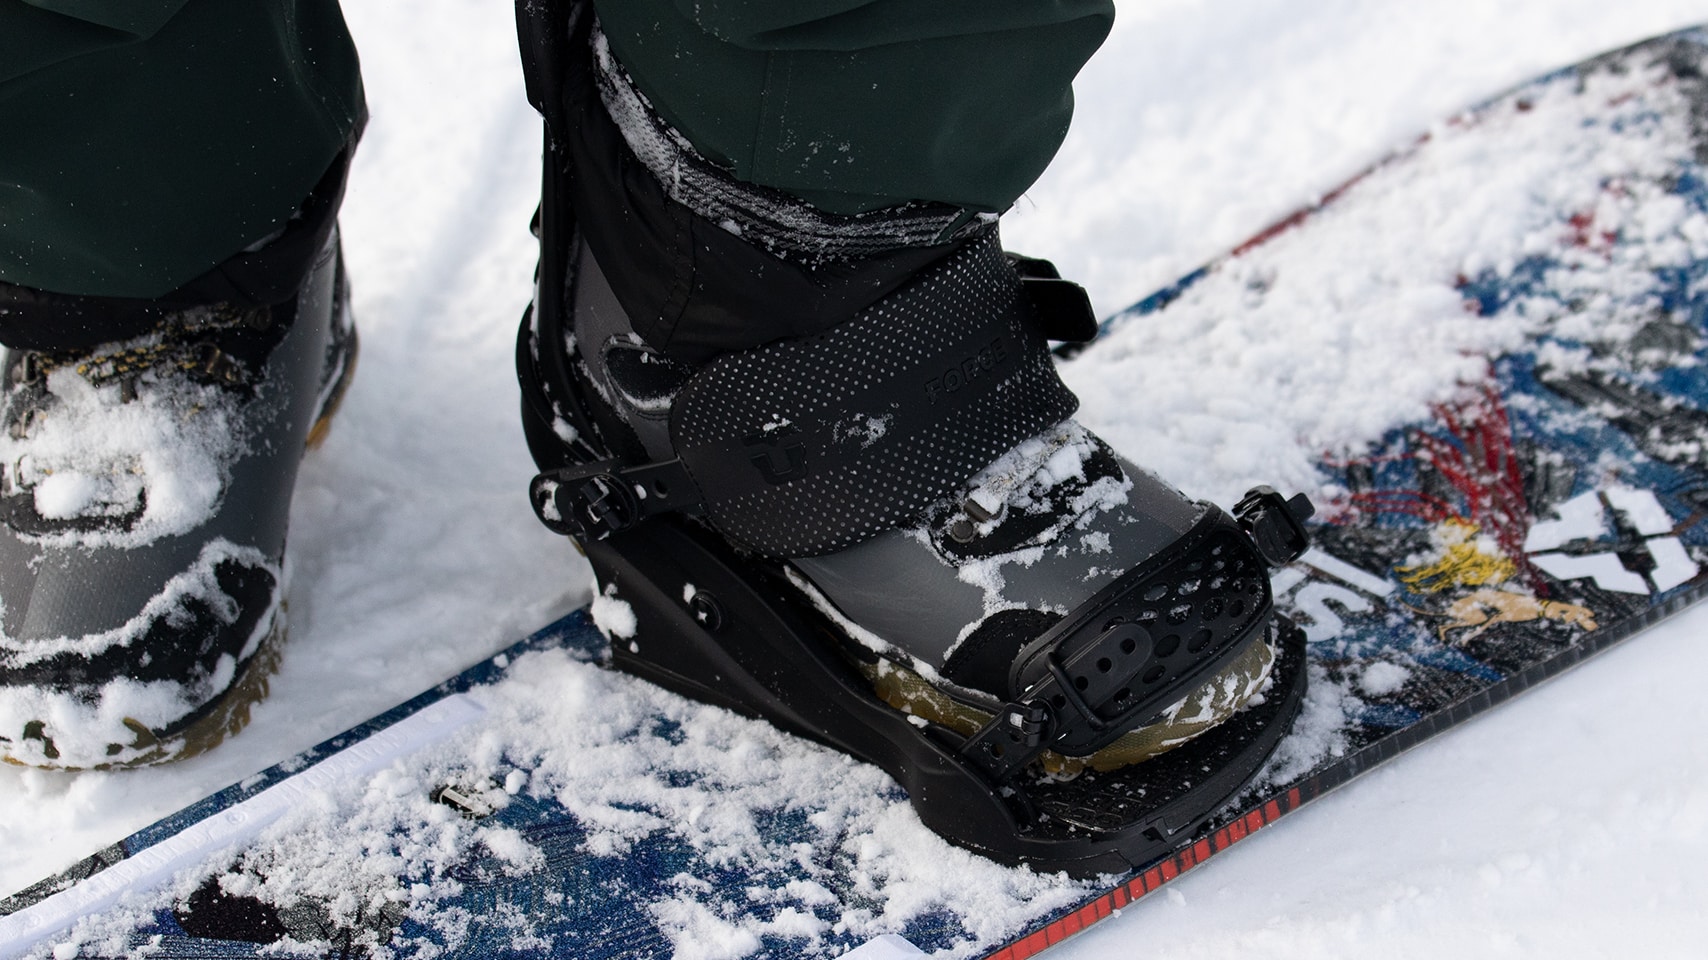 How To Properly Adjust Ankle & Toe Straps On Your Fix Bindings